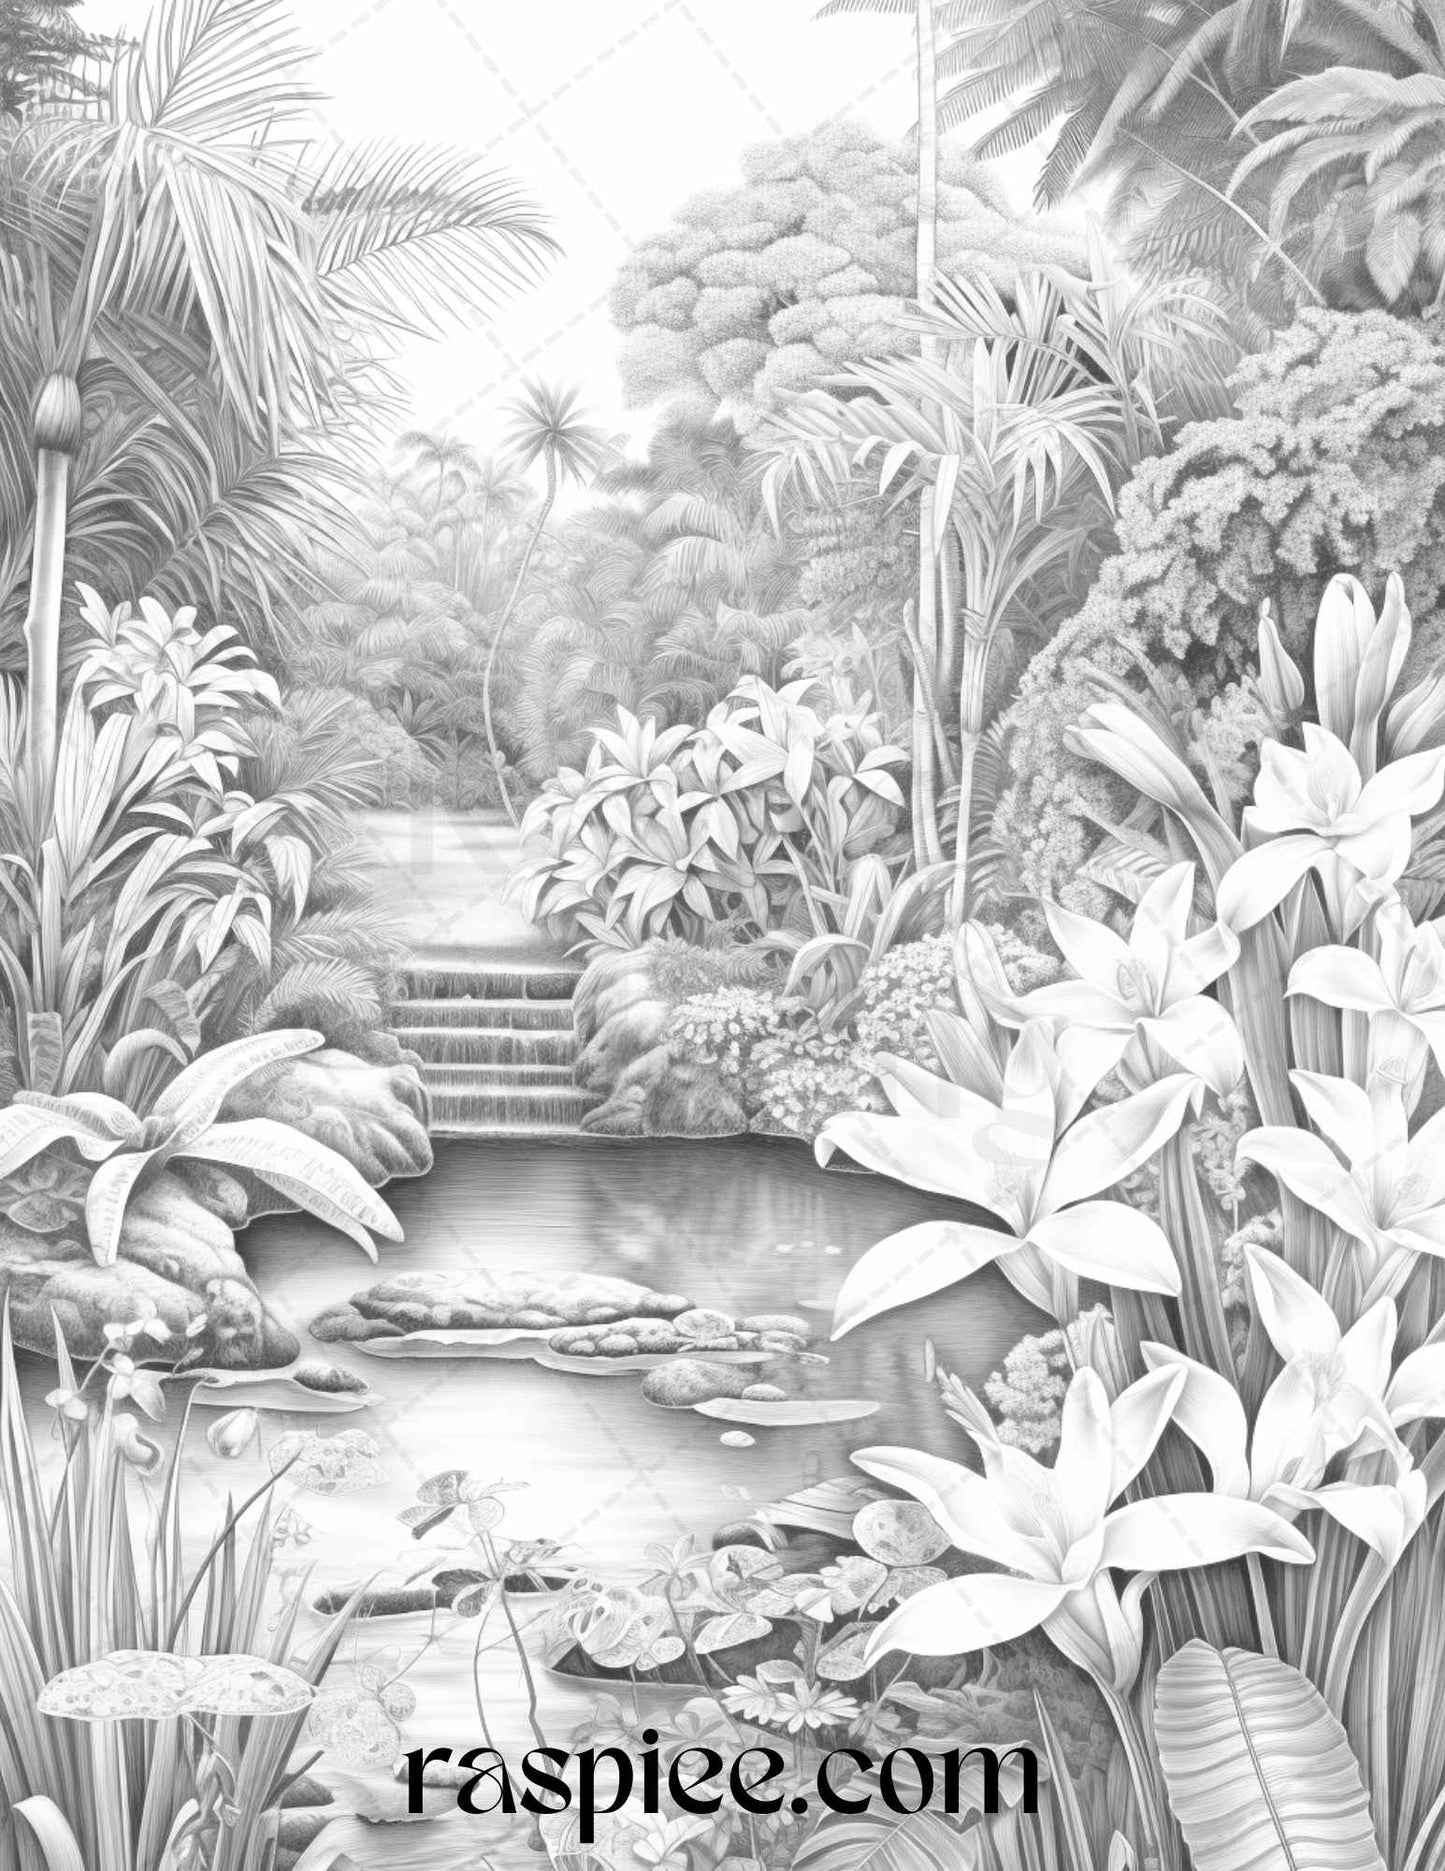 52 Tropical Oasis Grayscale Coloring Pages Printable for Adults, PDF File Instant Download - Raspiee Coloring